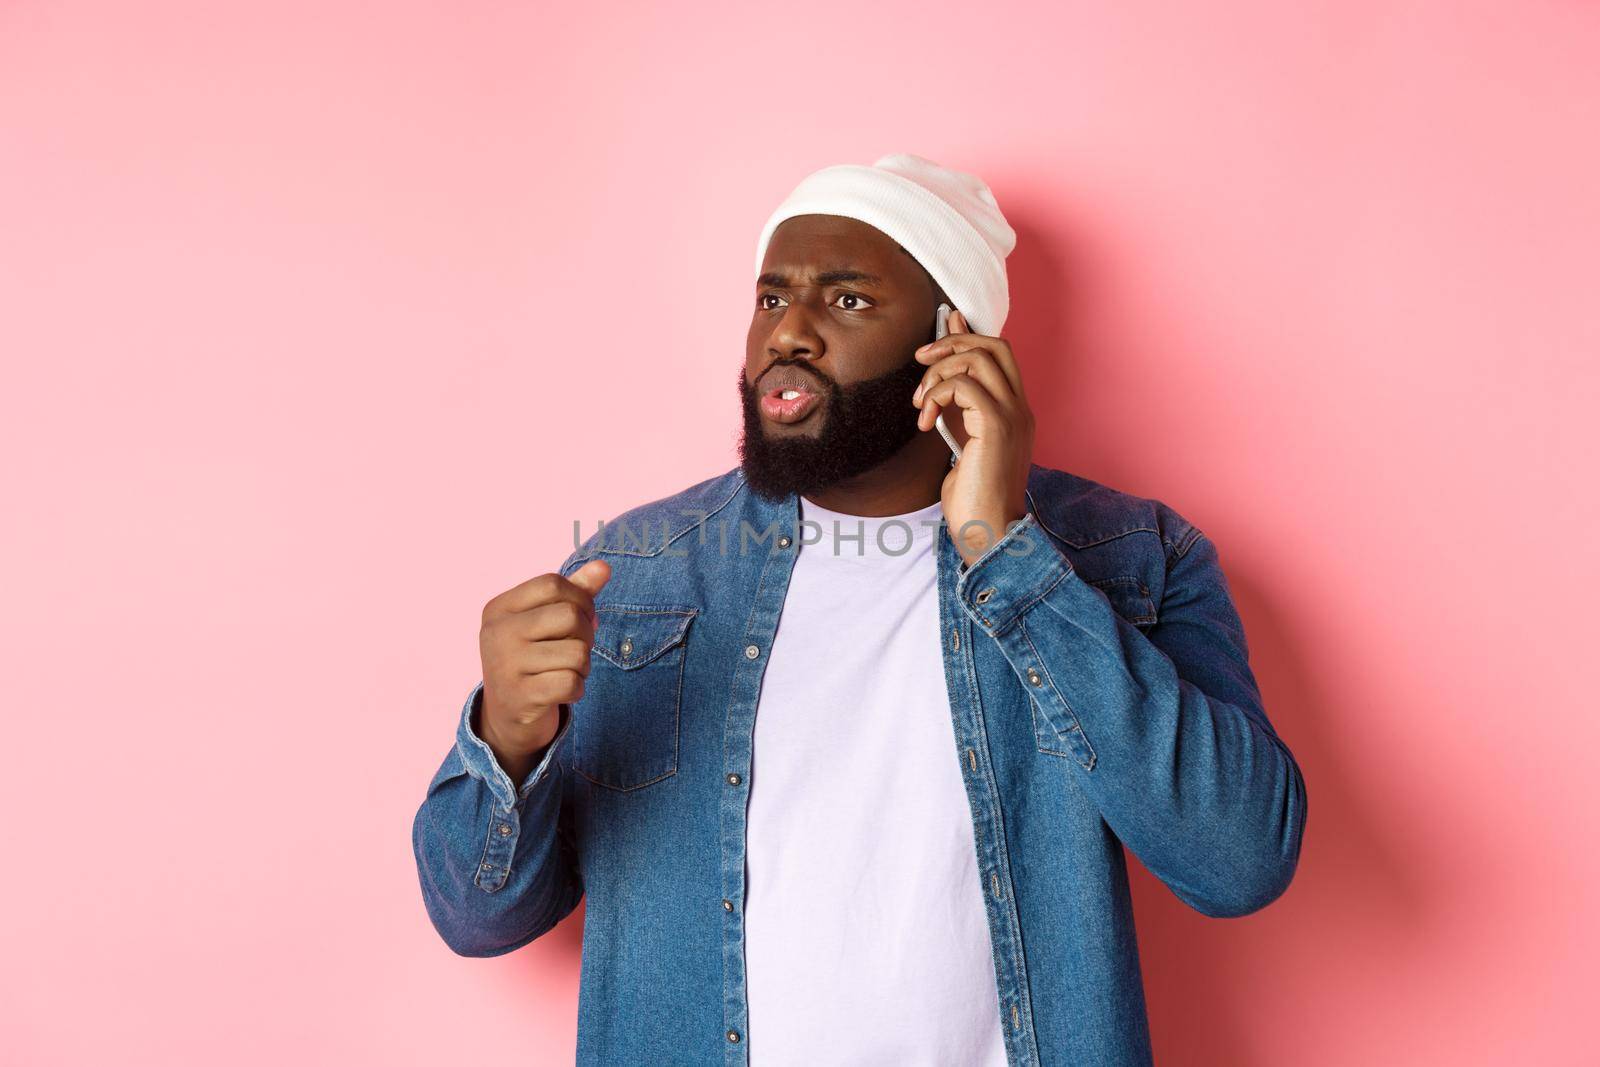 Angry african-american man talking on phone and threaten someone with raised fist, looking bothered at person, standing over pink background.